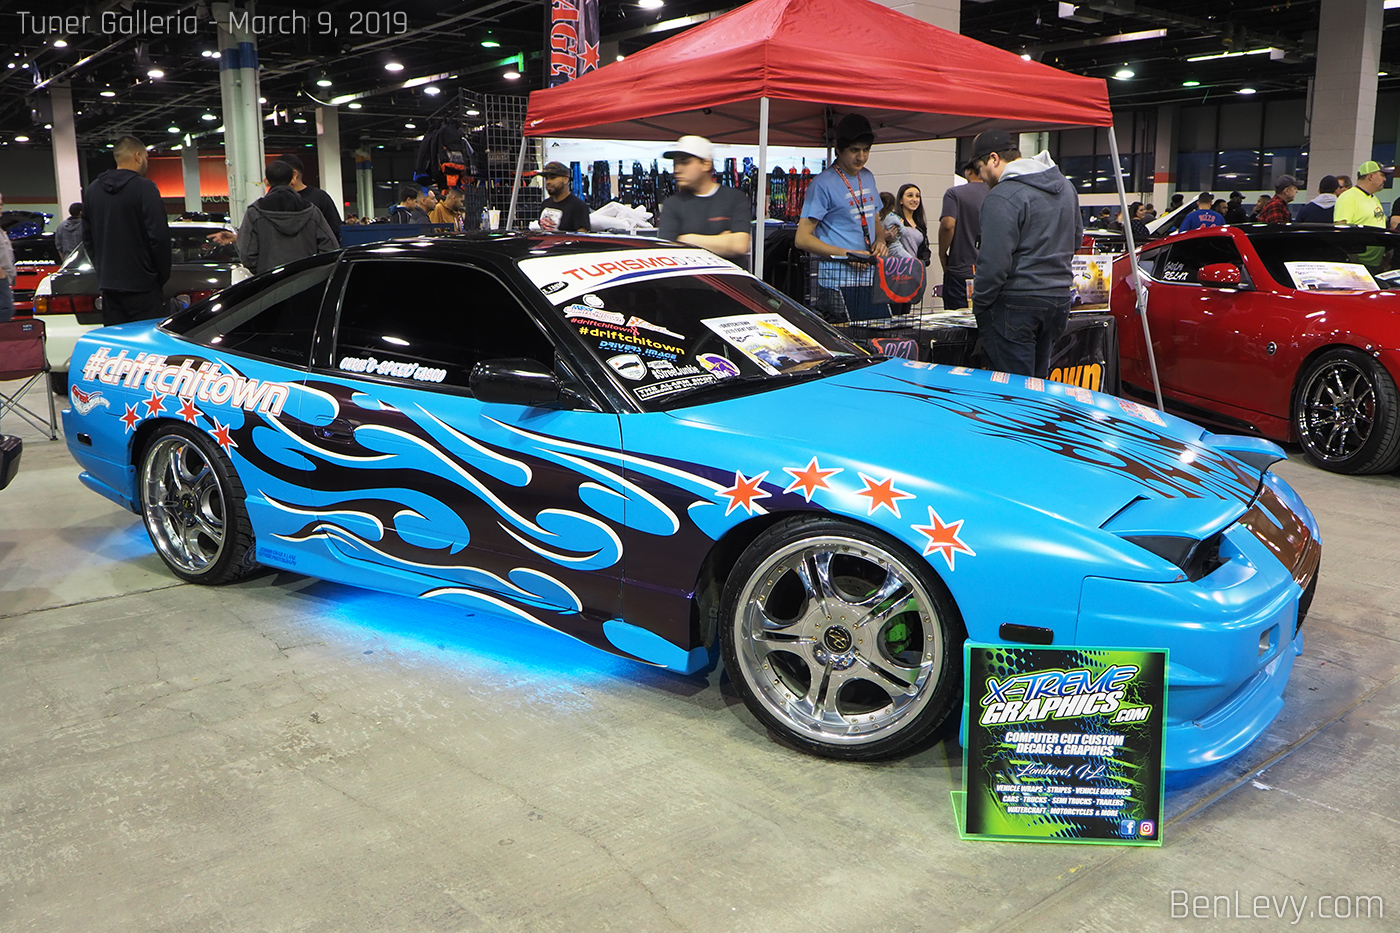 Wrapped S13 Nissan 240SX from X-Treme Graphics